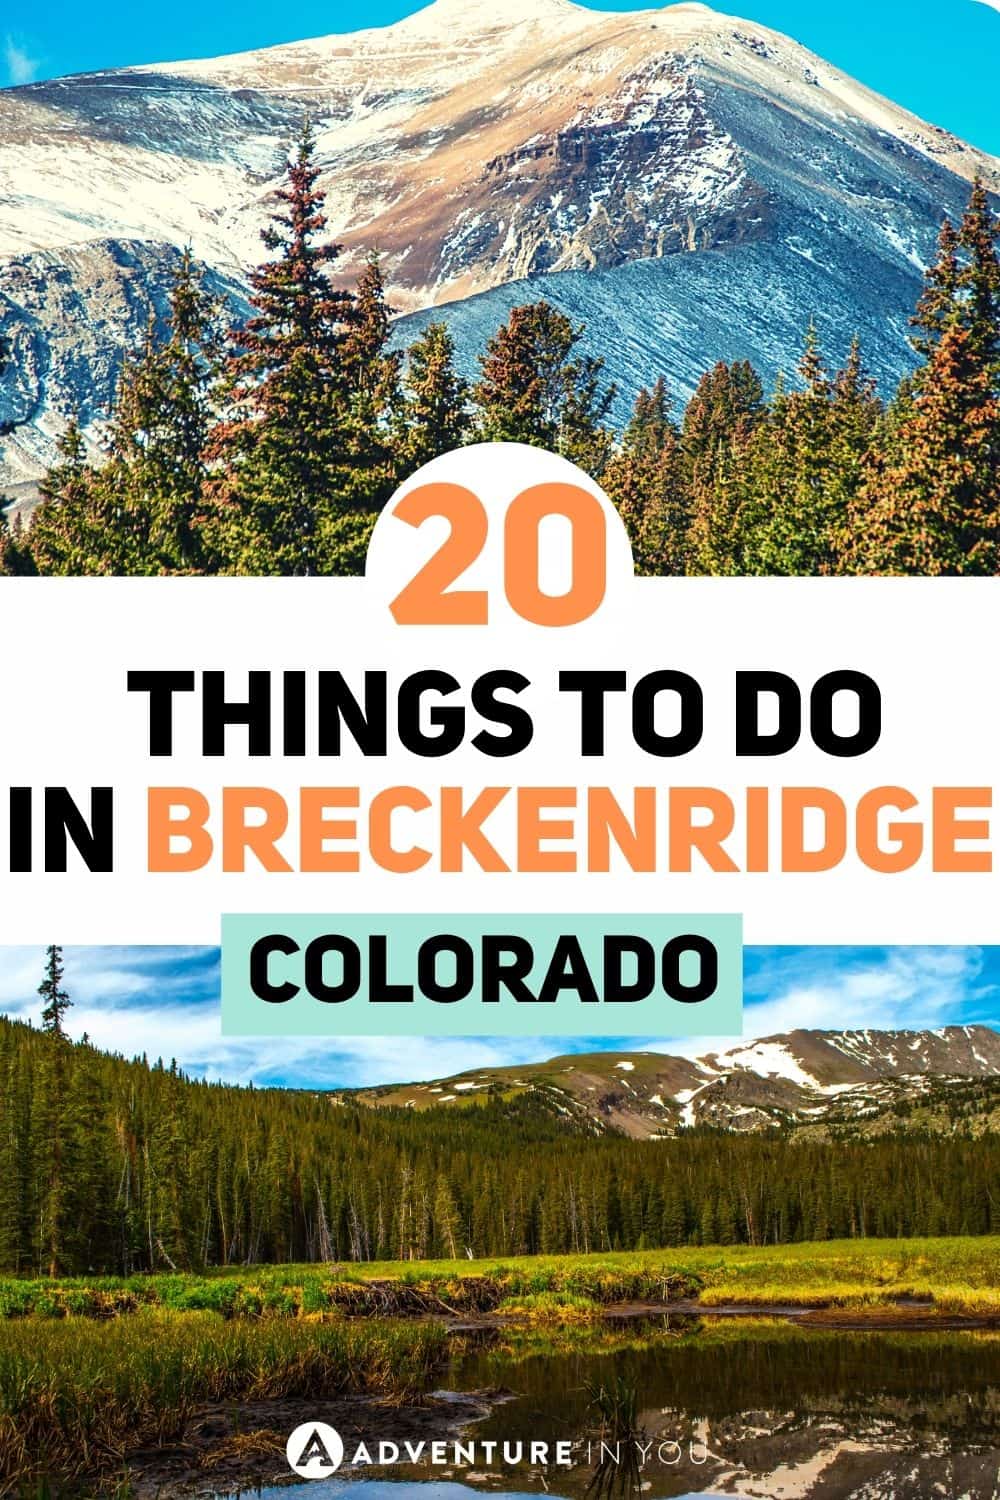 Things to Do in Breckenridge | Taking a trip to Breckenridge? Here are the top 20 things to do!